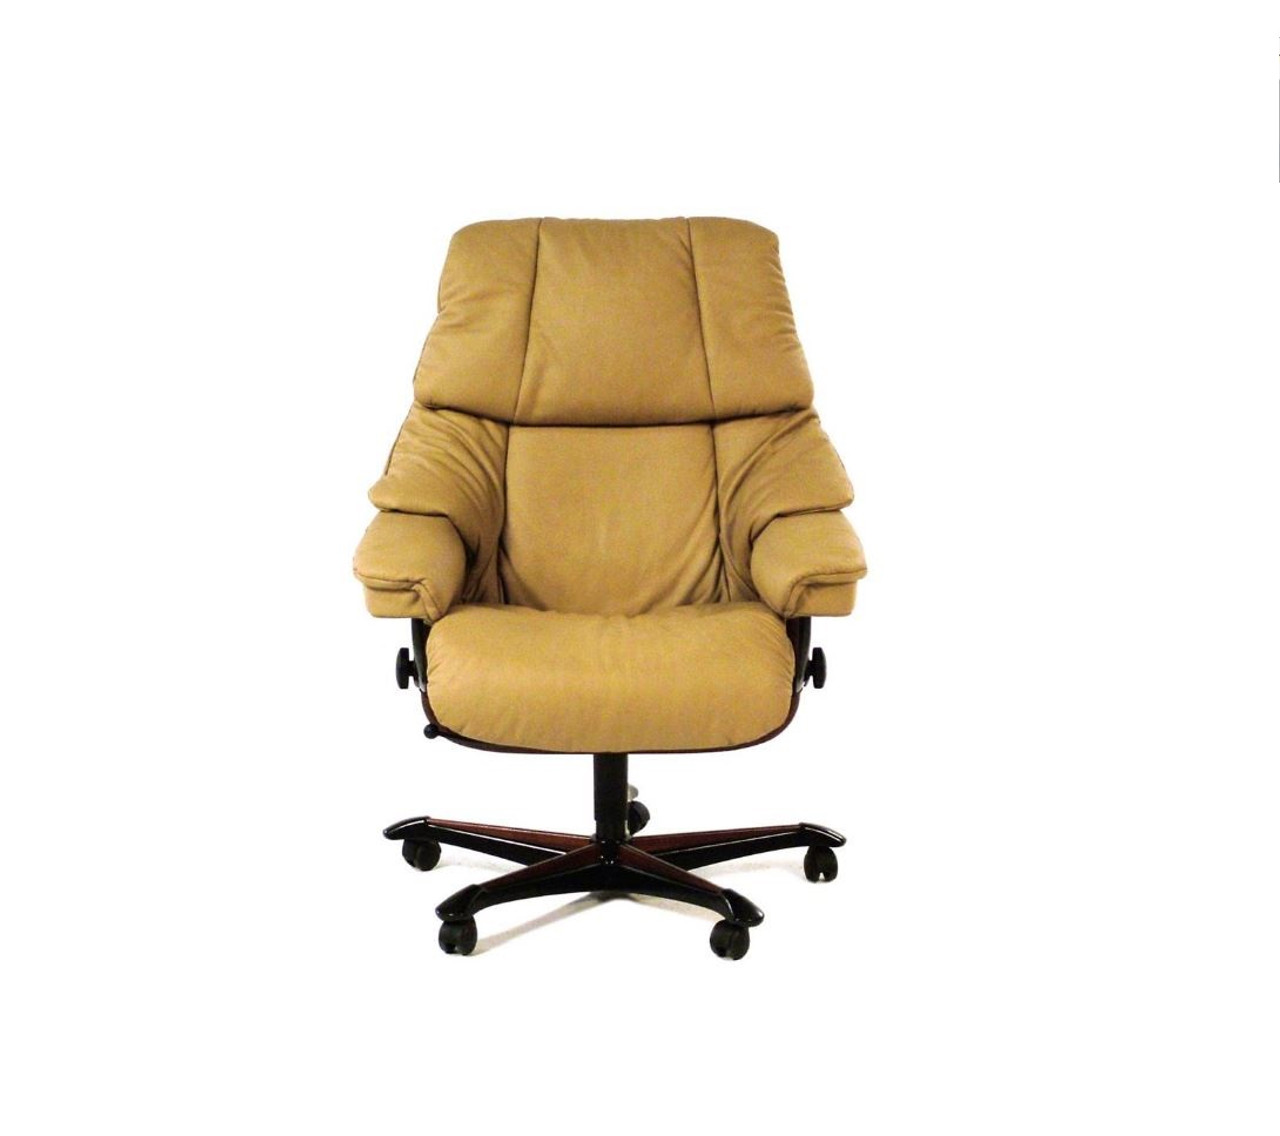 Ekornes Stressless Reno Office Chair Authorized Clearance Discounts